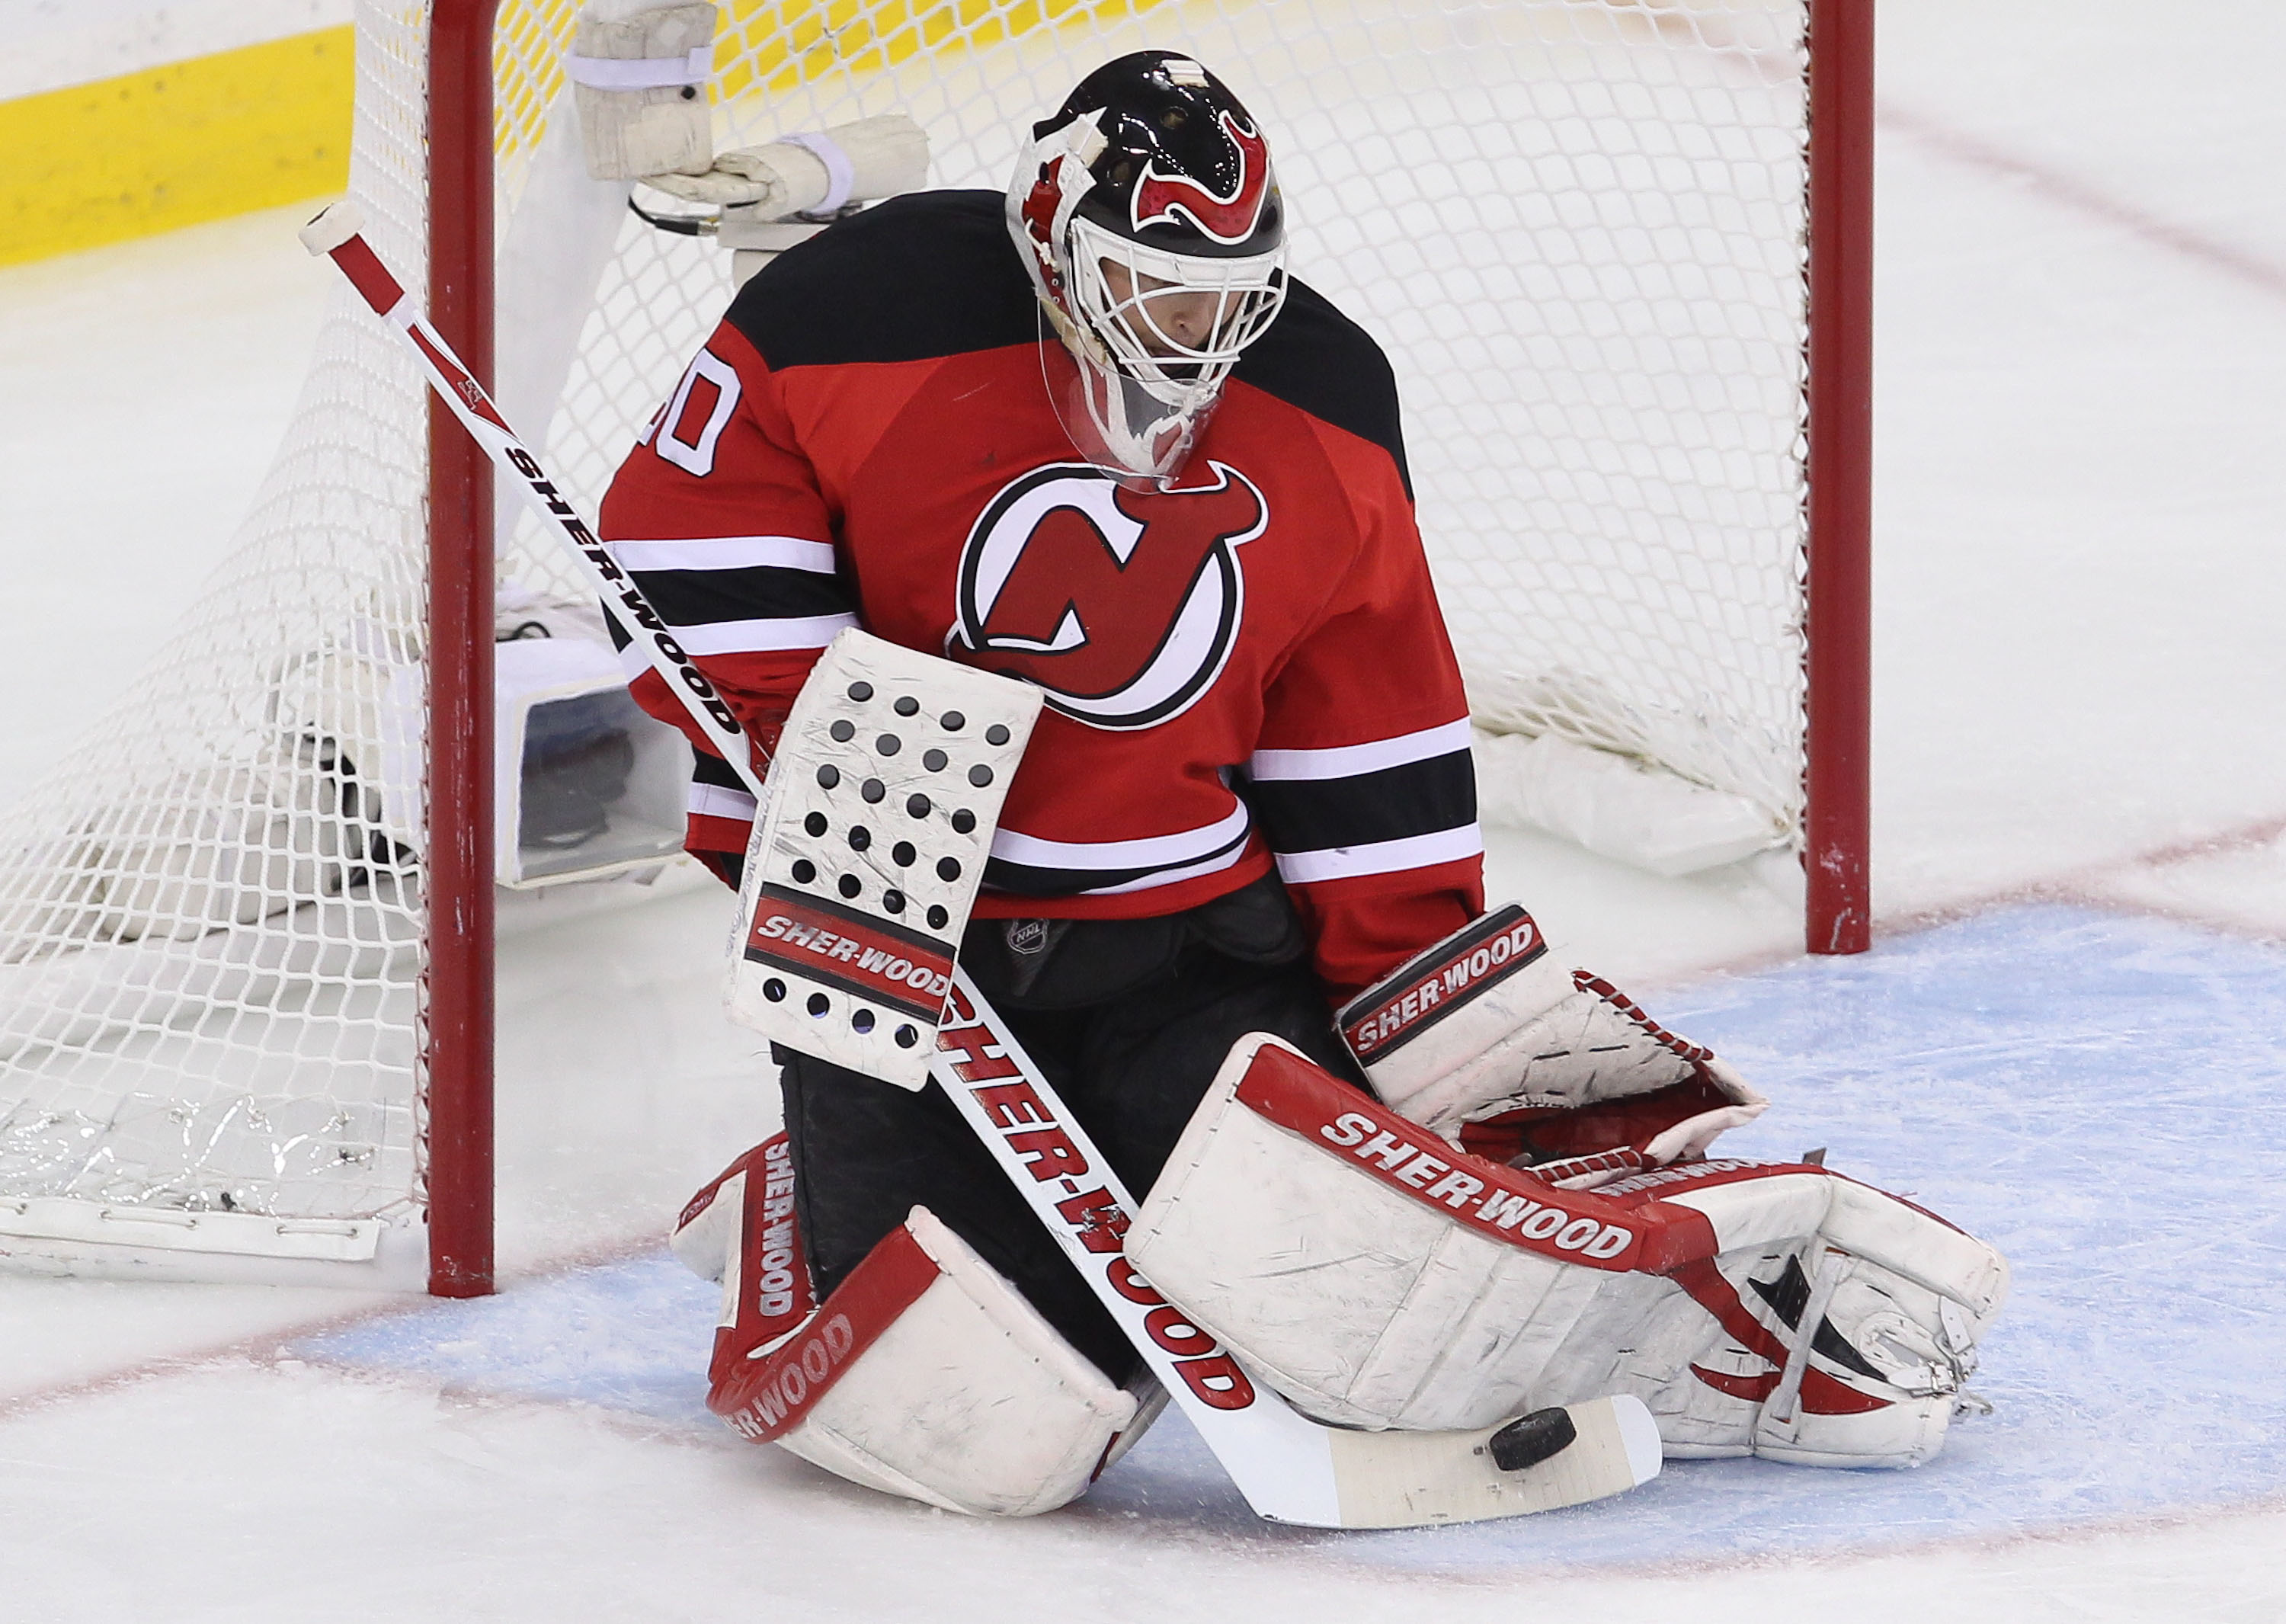 Martin Brodeur to retire, join St. Louis Blues' front office